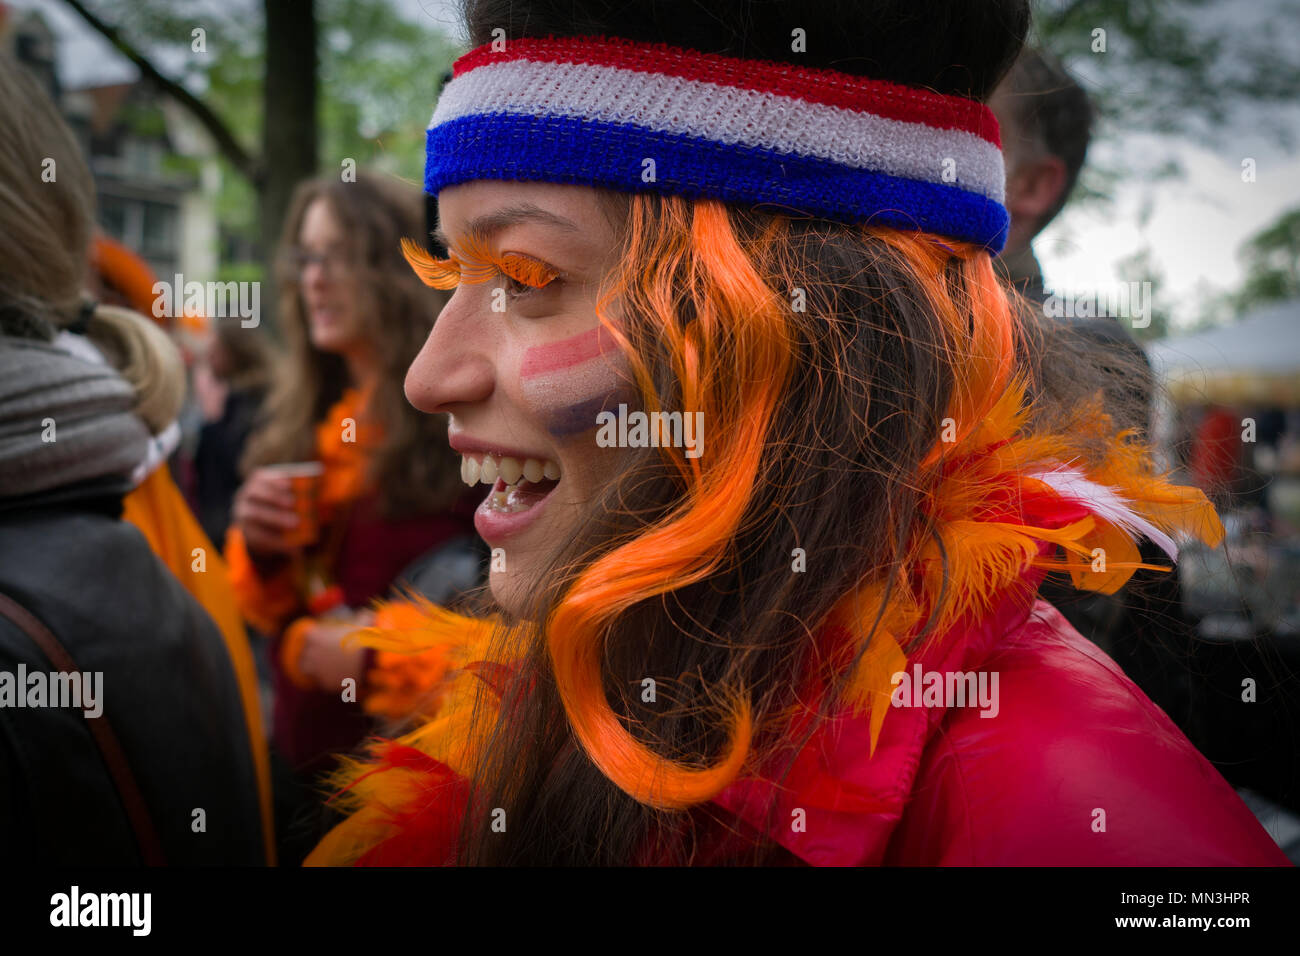 Celebration of King's Day in the city of Amsterdam Stock Photo